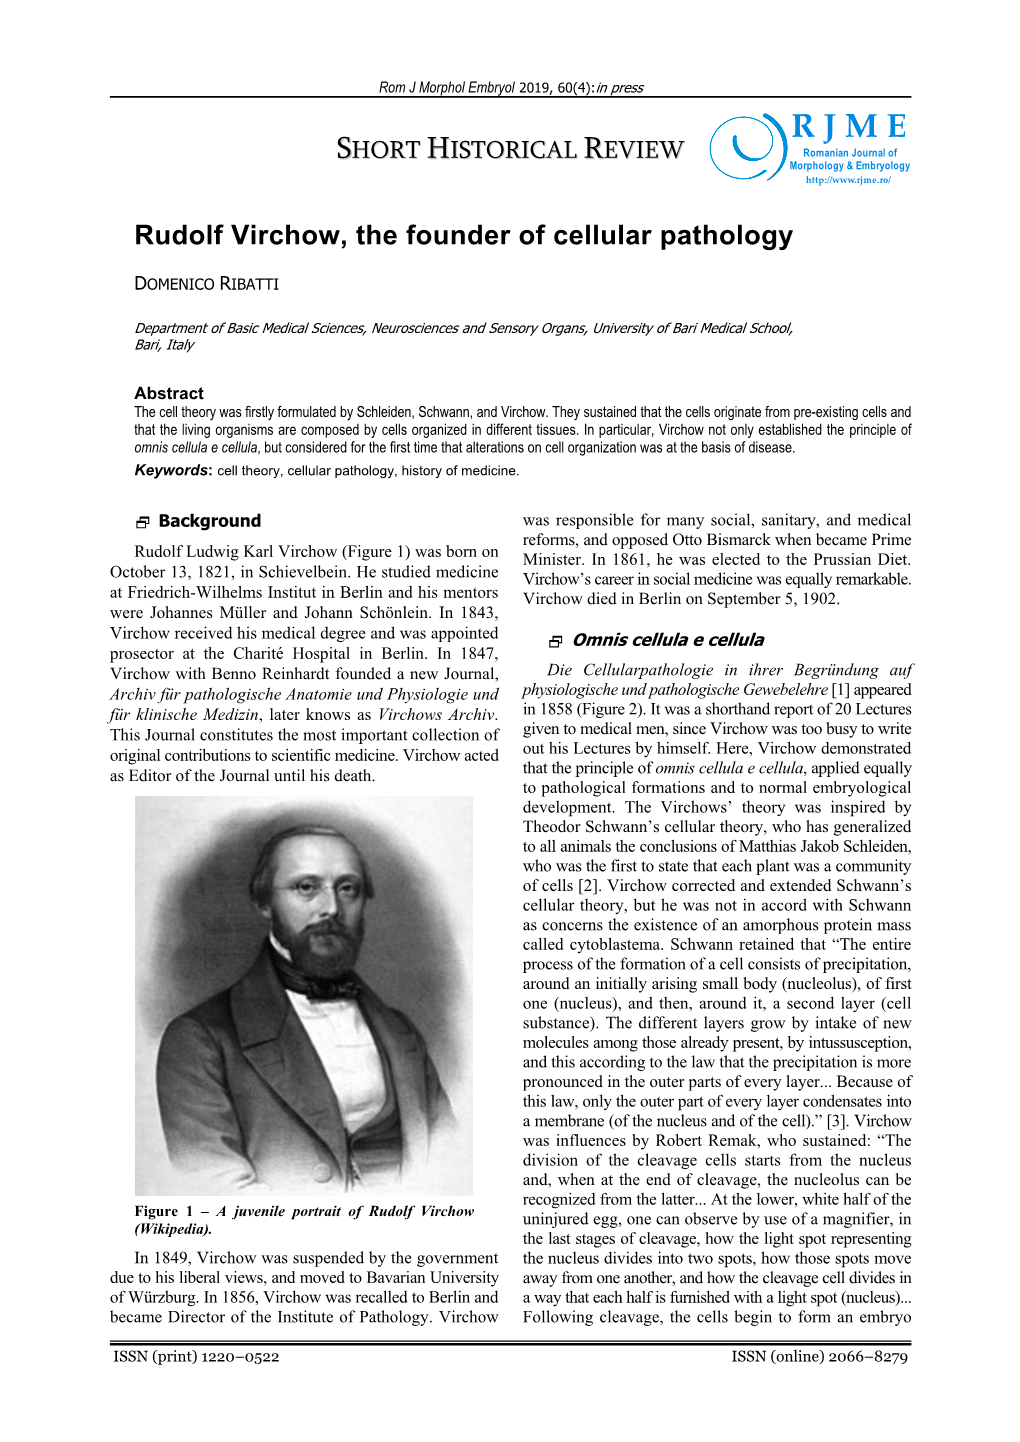 Rudolf Virchow, the Founder of Cellular Pathology